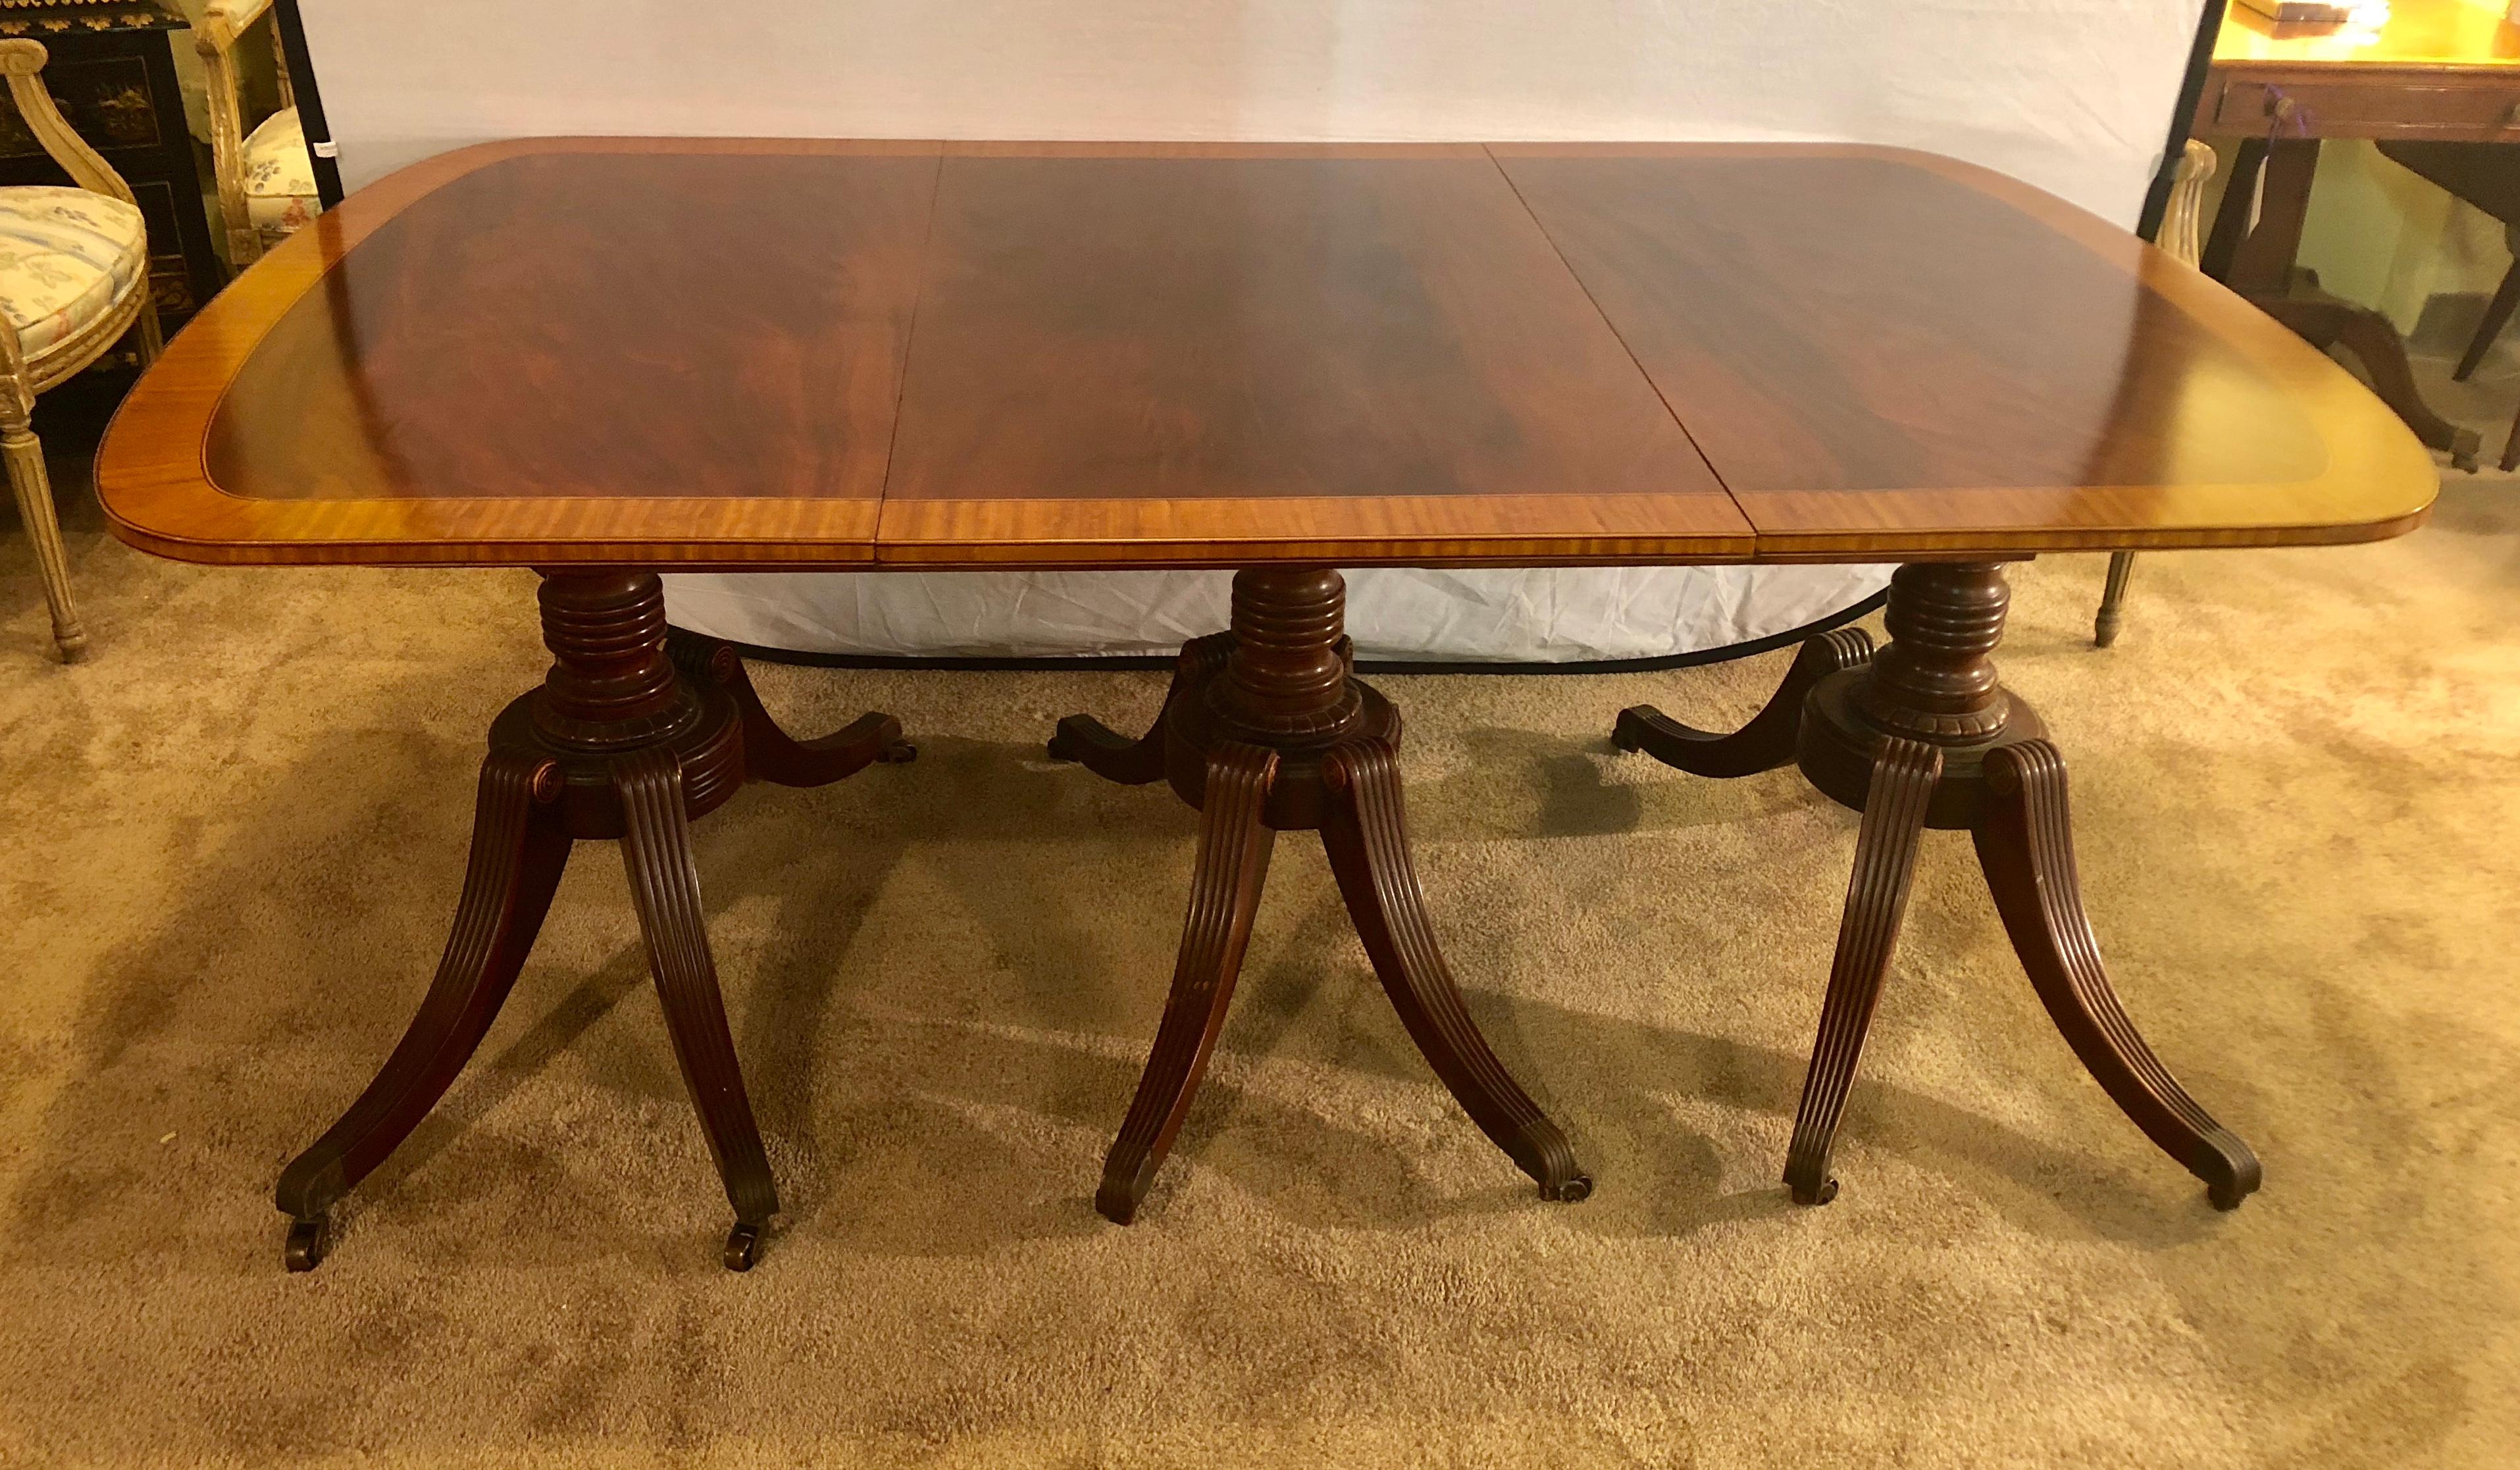 Georgian Style Crotch Mahogany Triple Pedestal Dining Table with Four Leaves 1